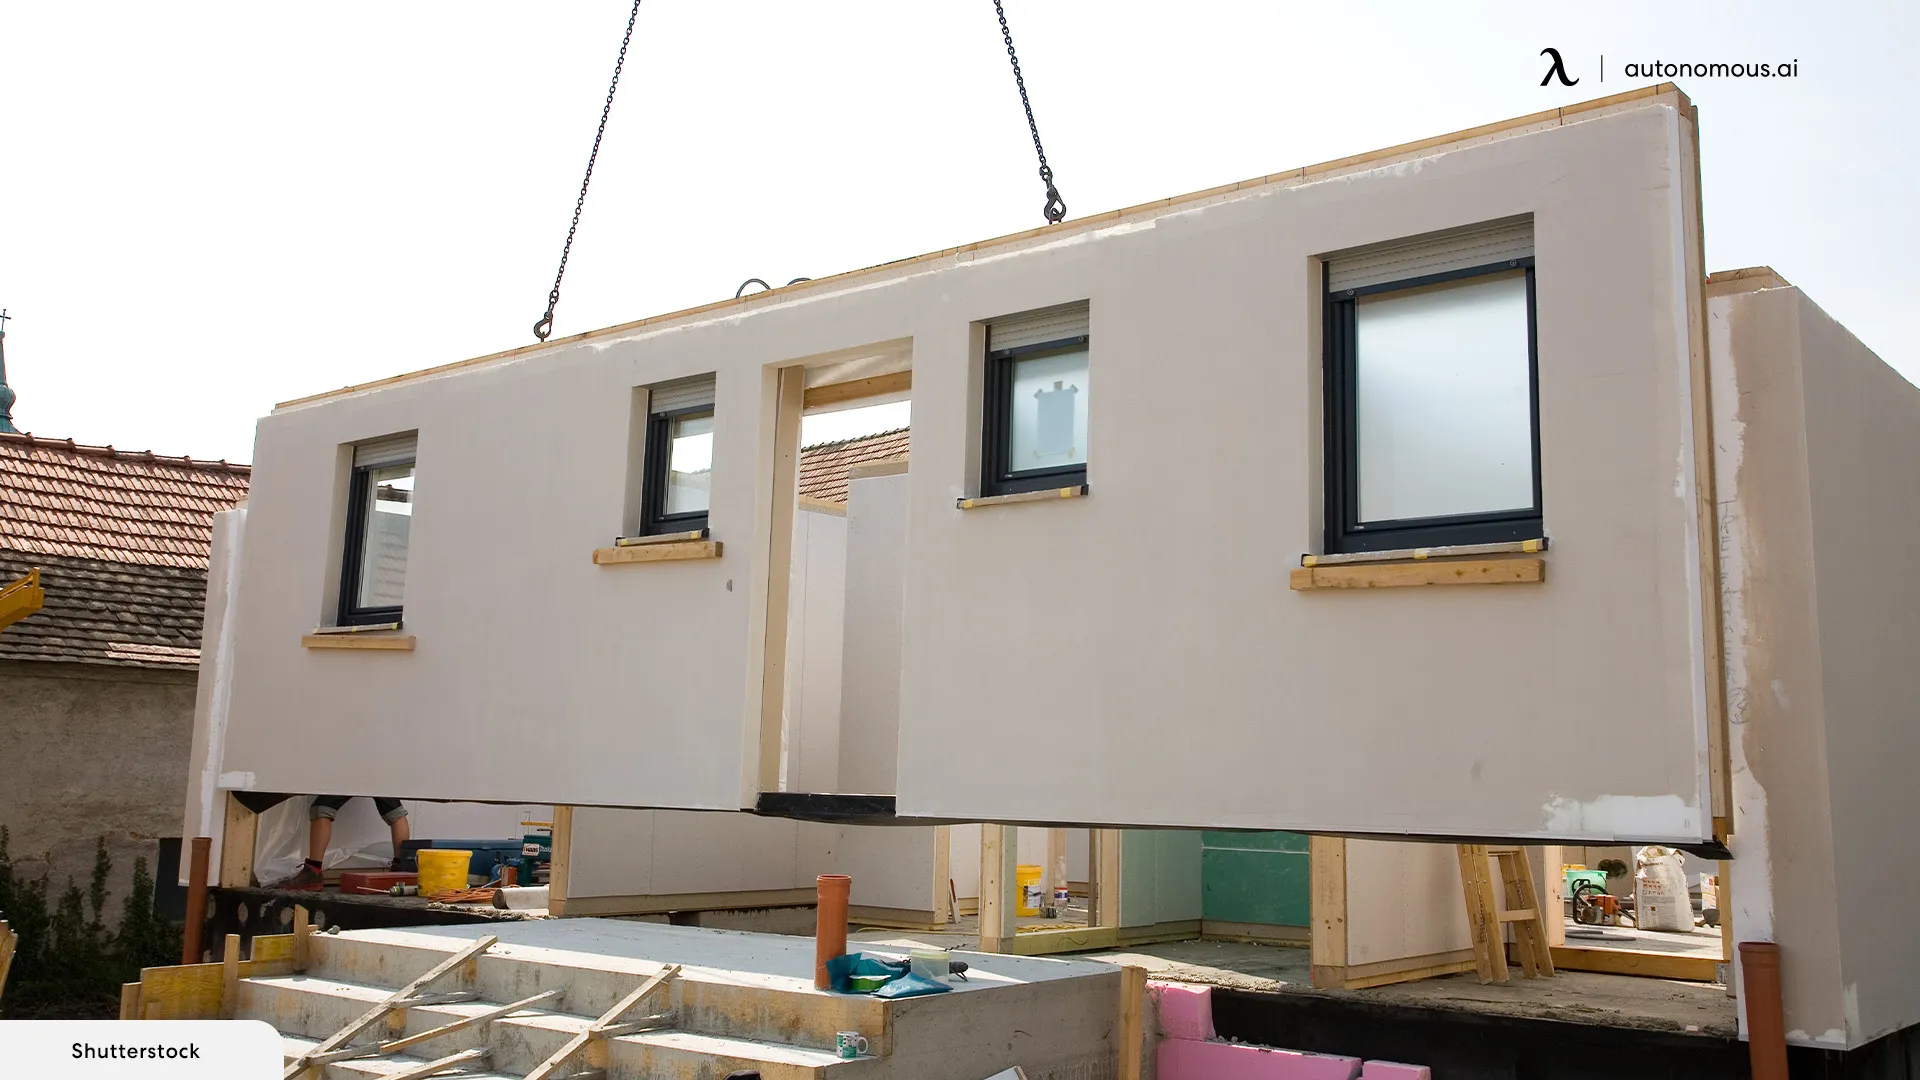 Easy and Quick Construction - Benefits of modular homes